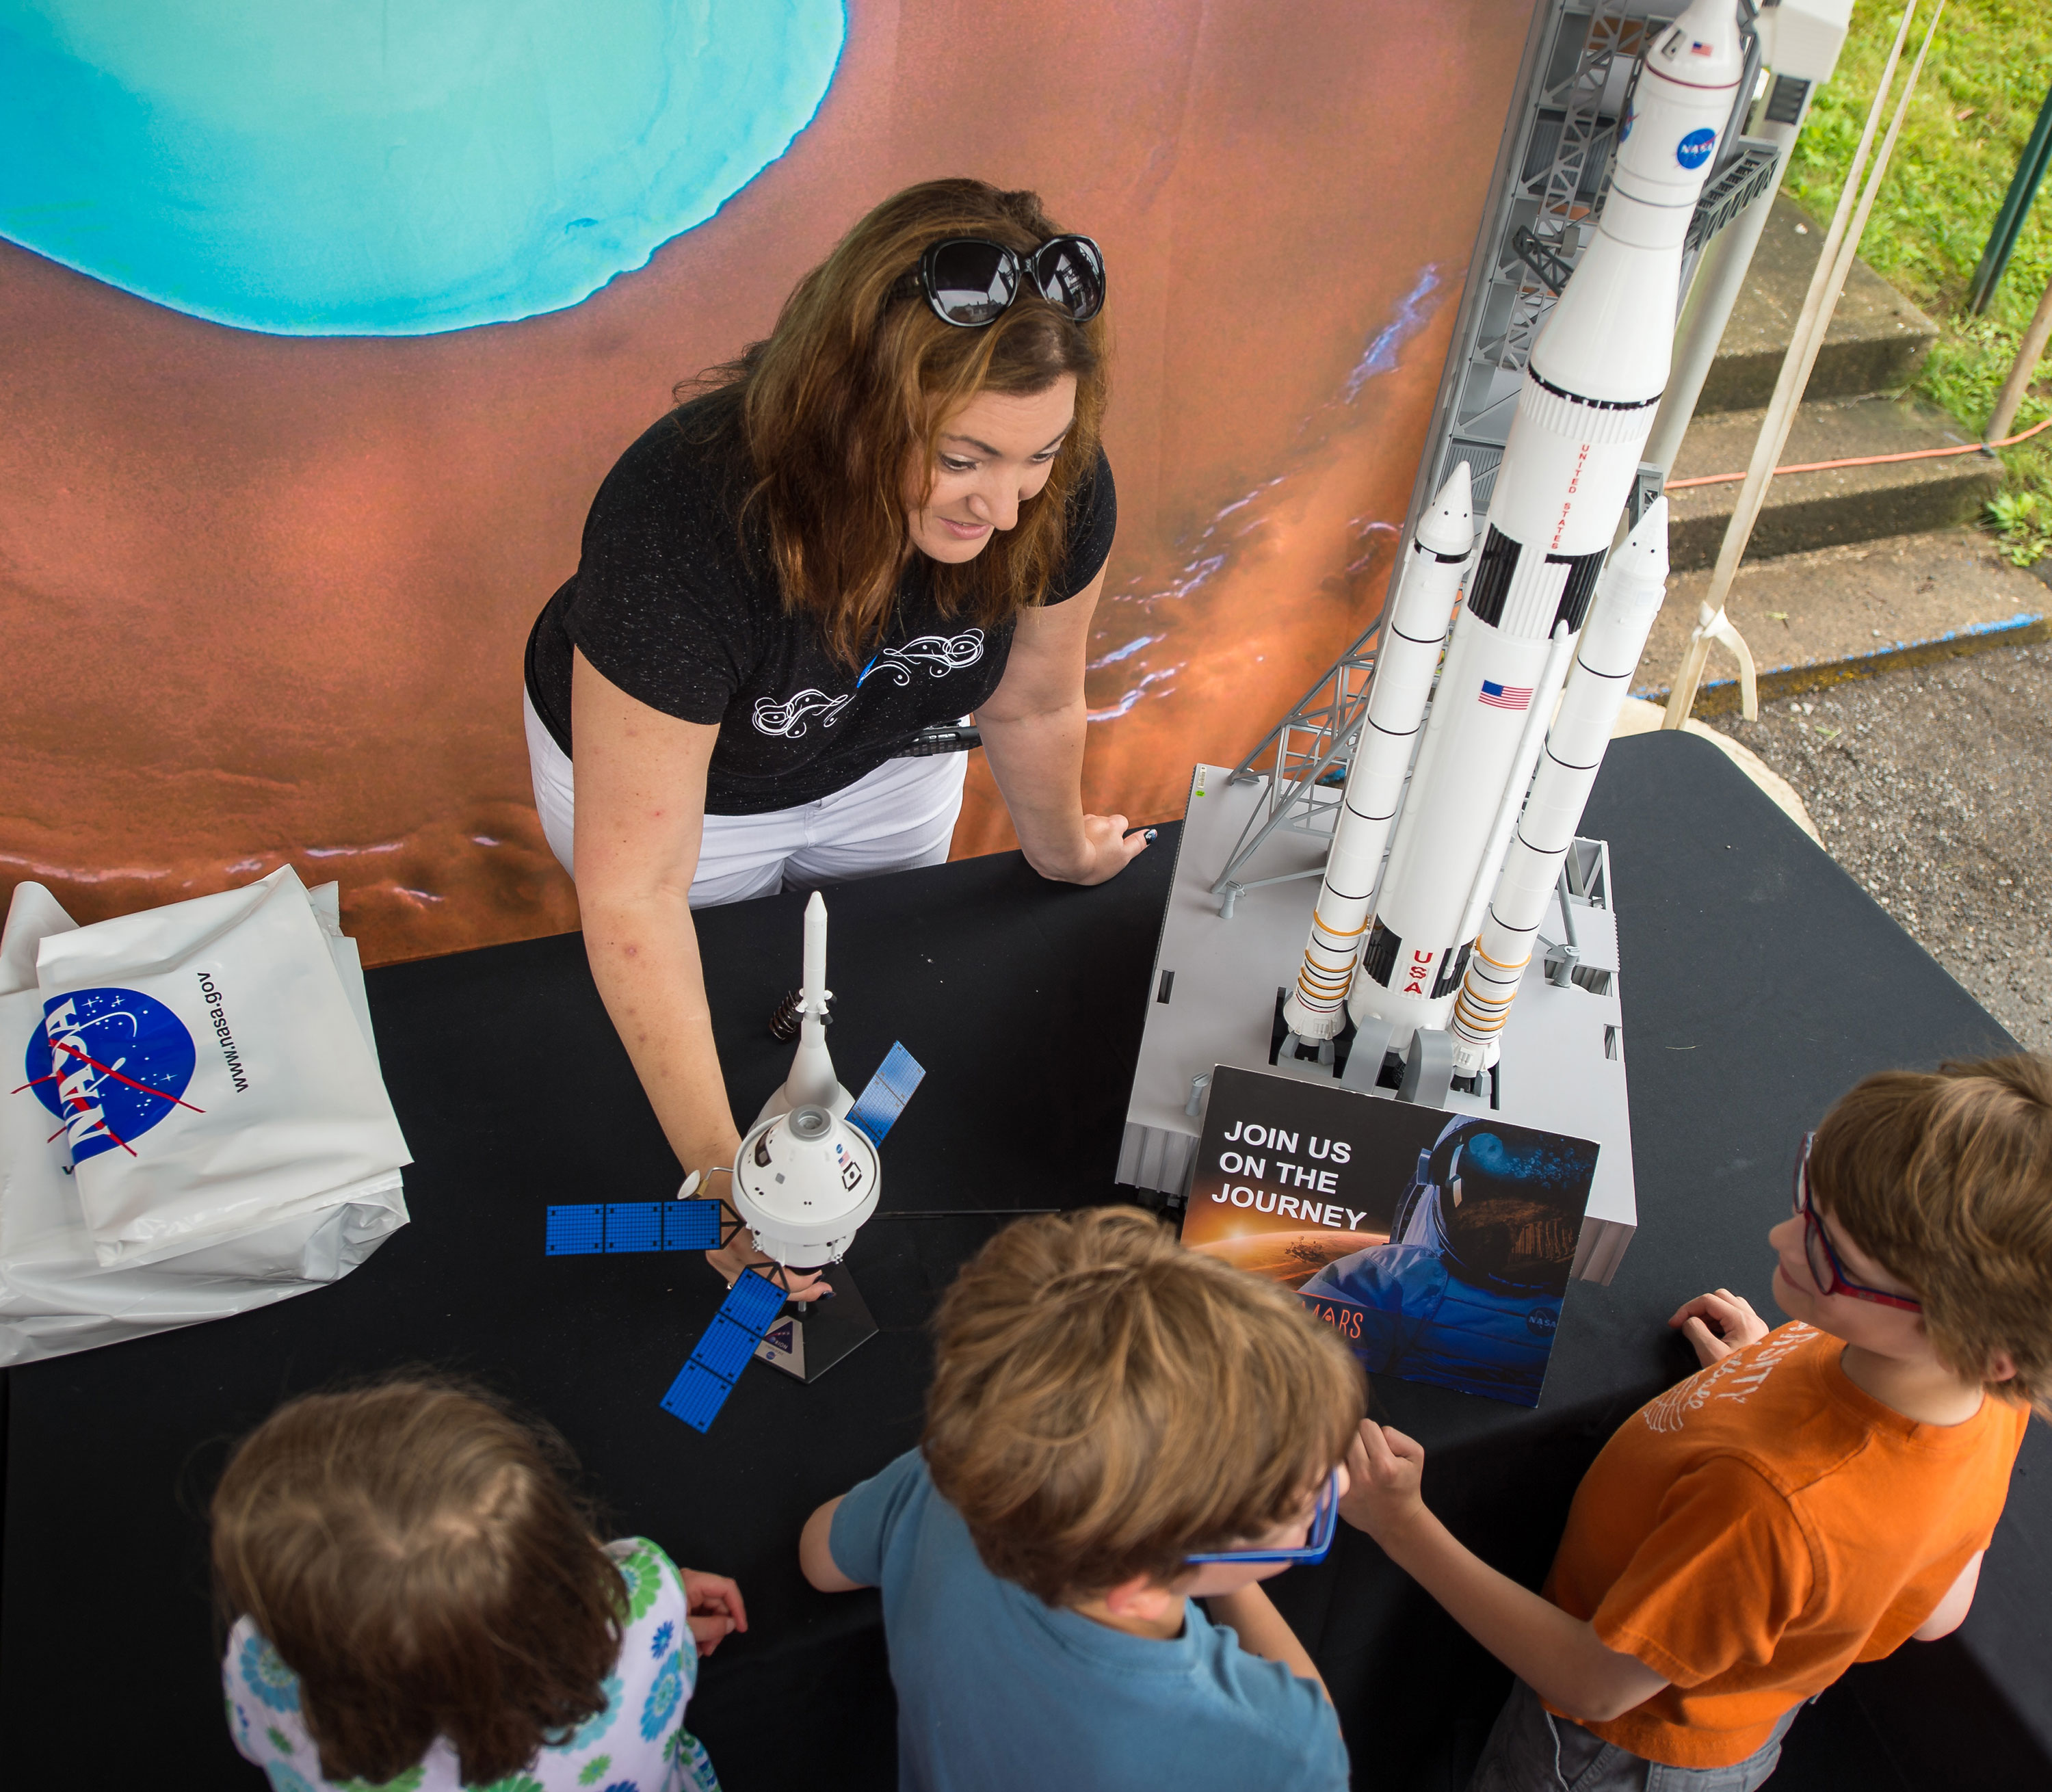 NASA Communications Manager for Exploration Systems Development Ashley Edwards talks with children about NASA's Journey to Mars during the Mars New Year's celebration. Credit: NASA/Bill Ingalls